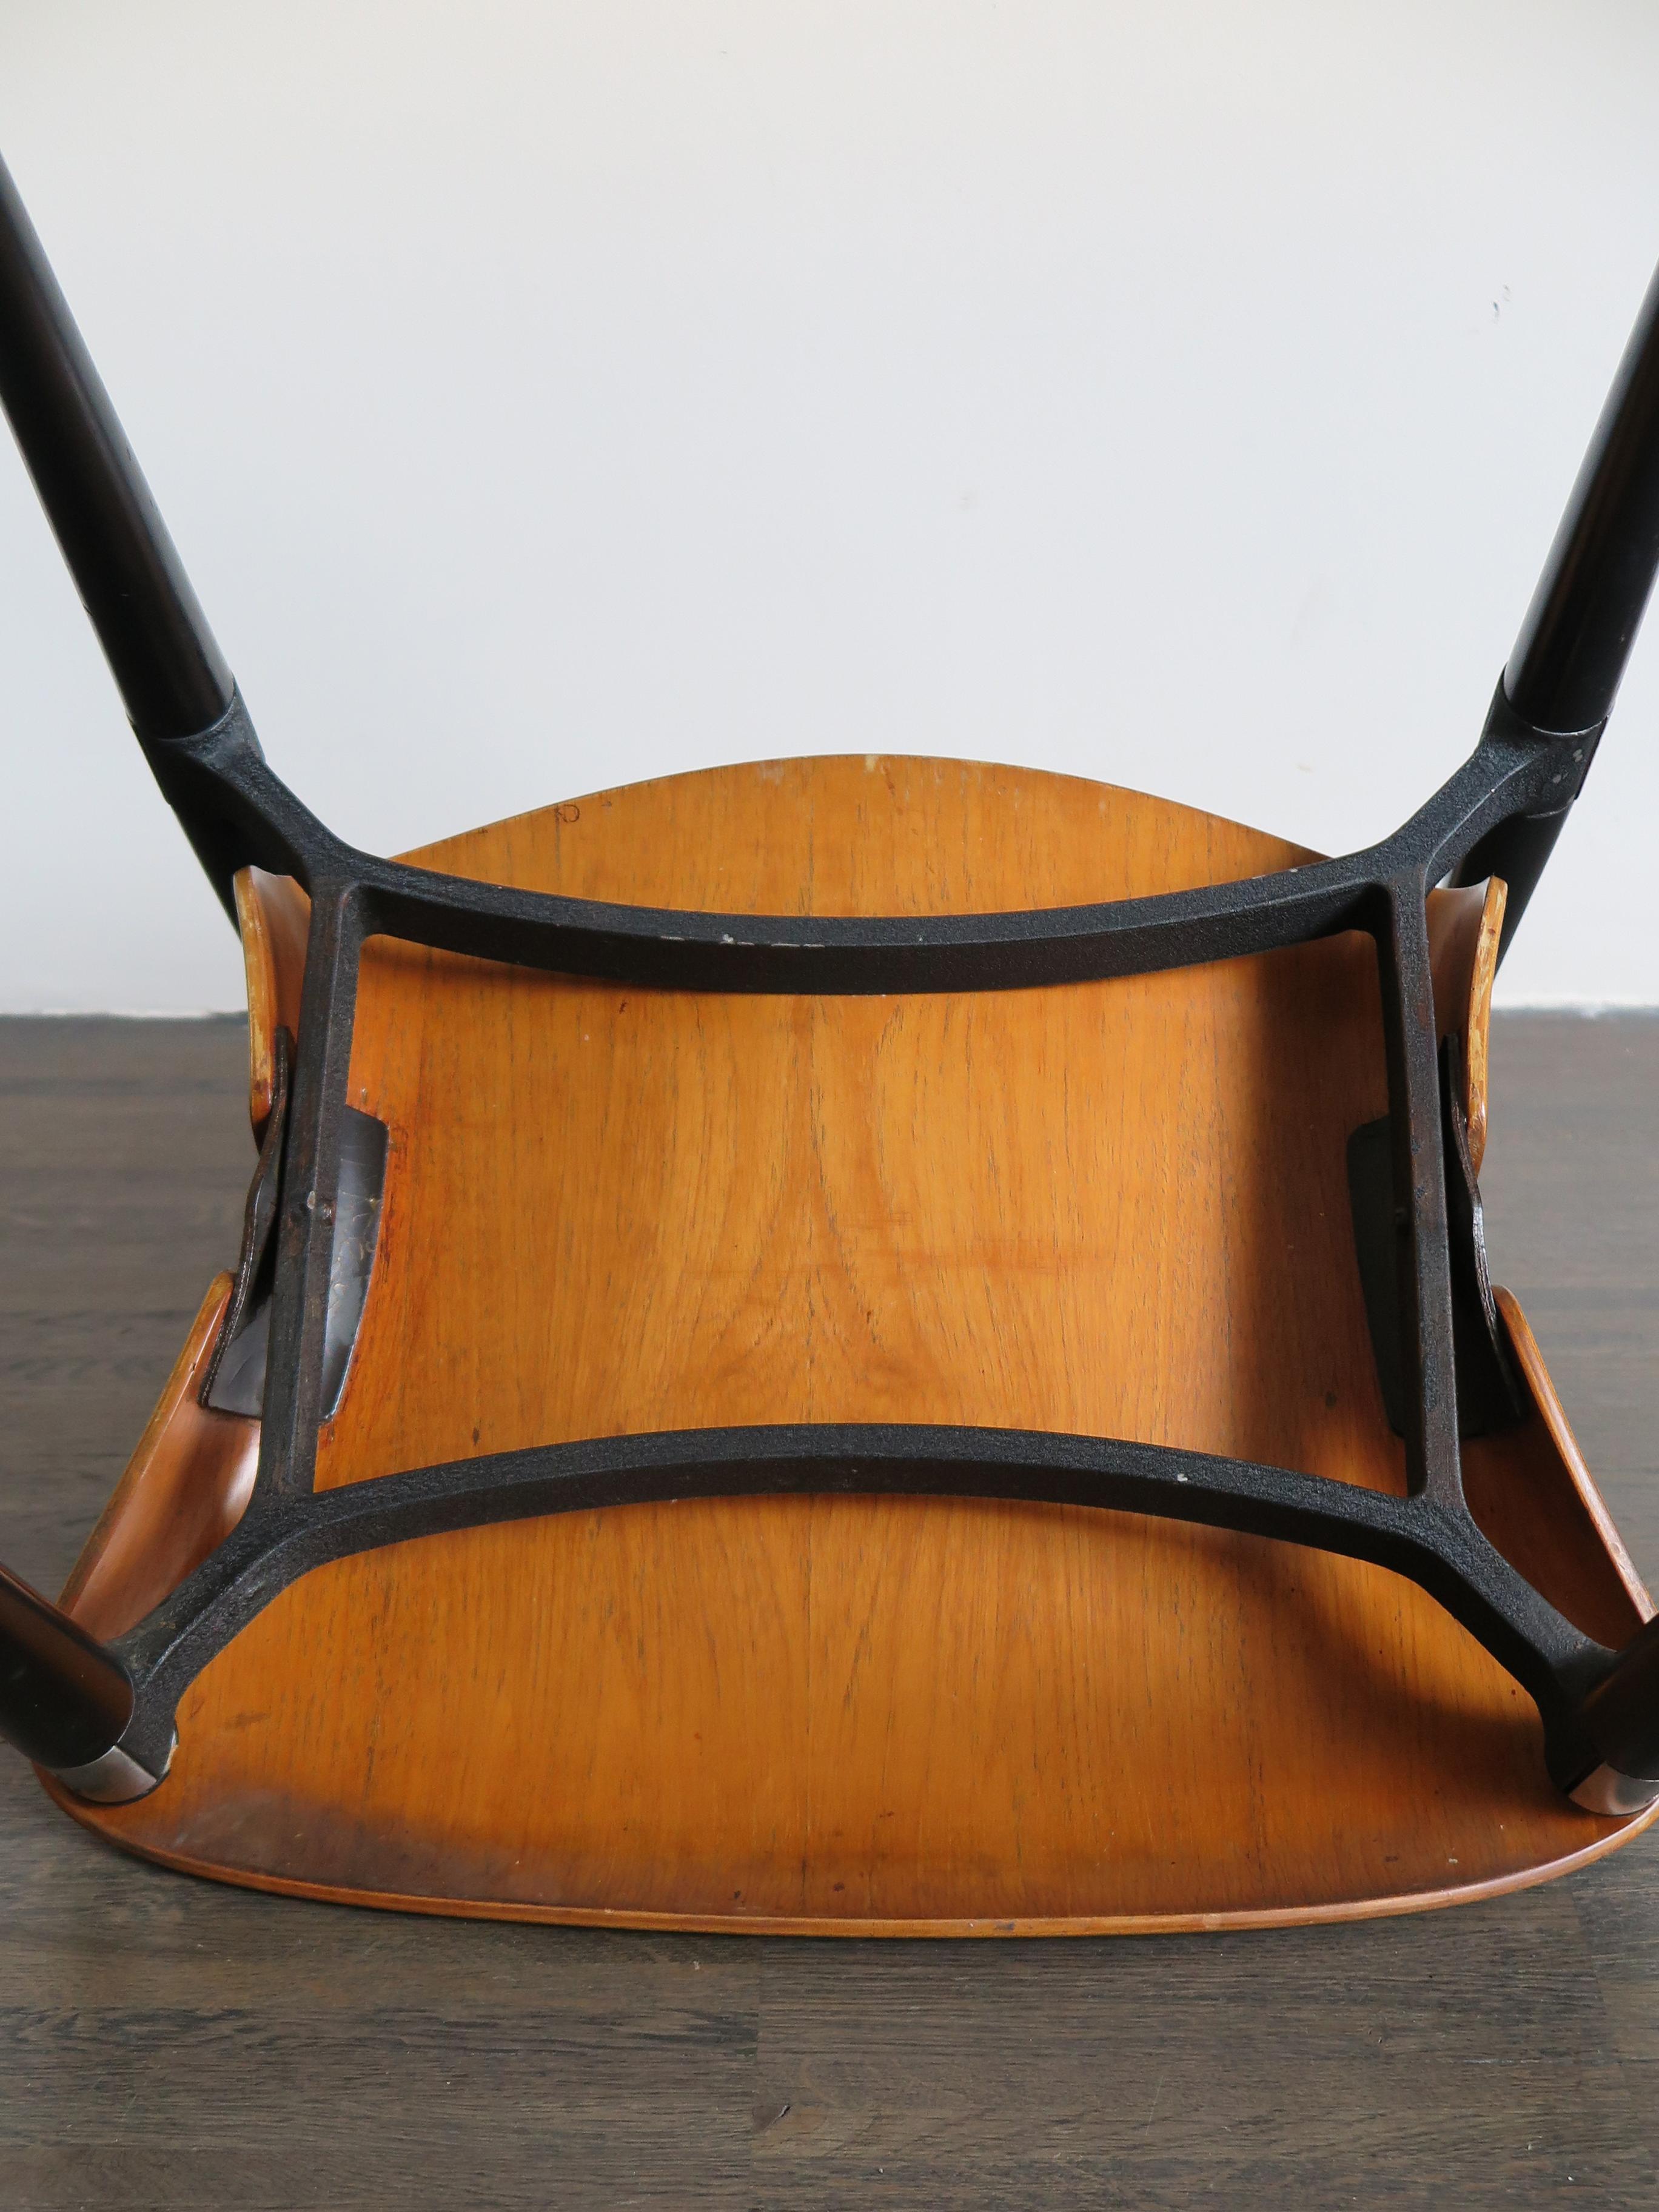 Eugenio Gerli for Tecno Italian Curved Wood Dining Chairs Model “S832”, 1962 13